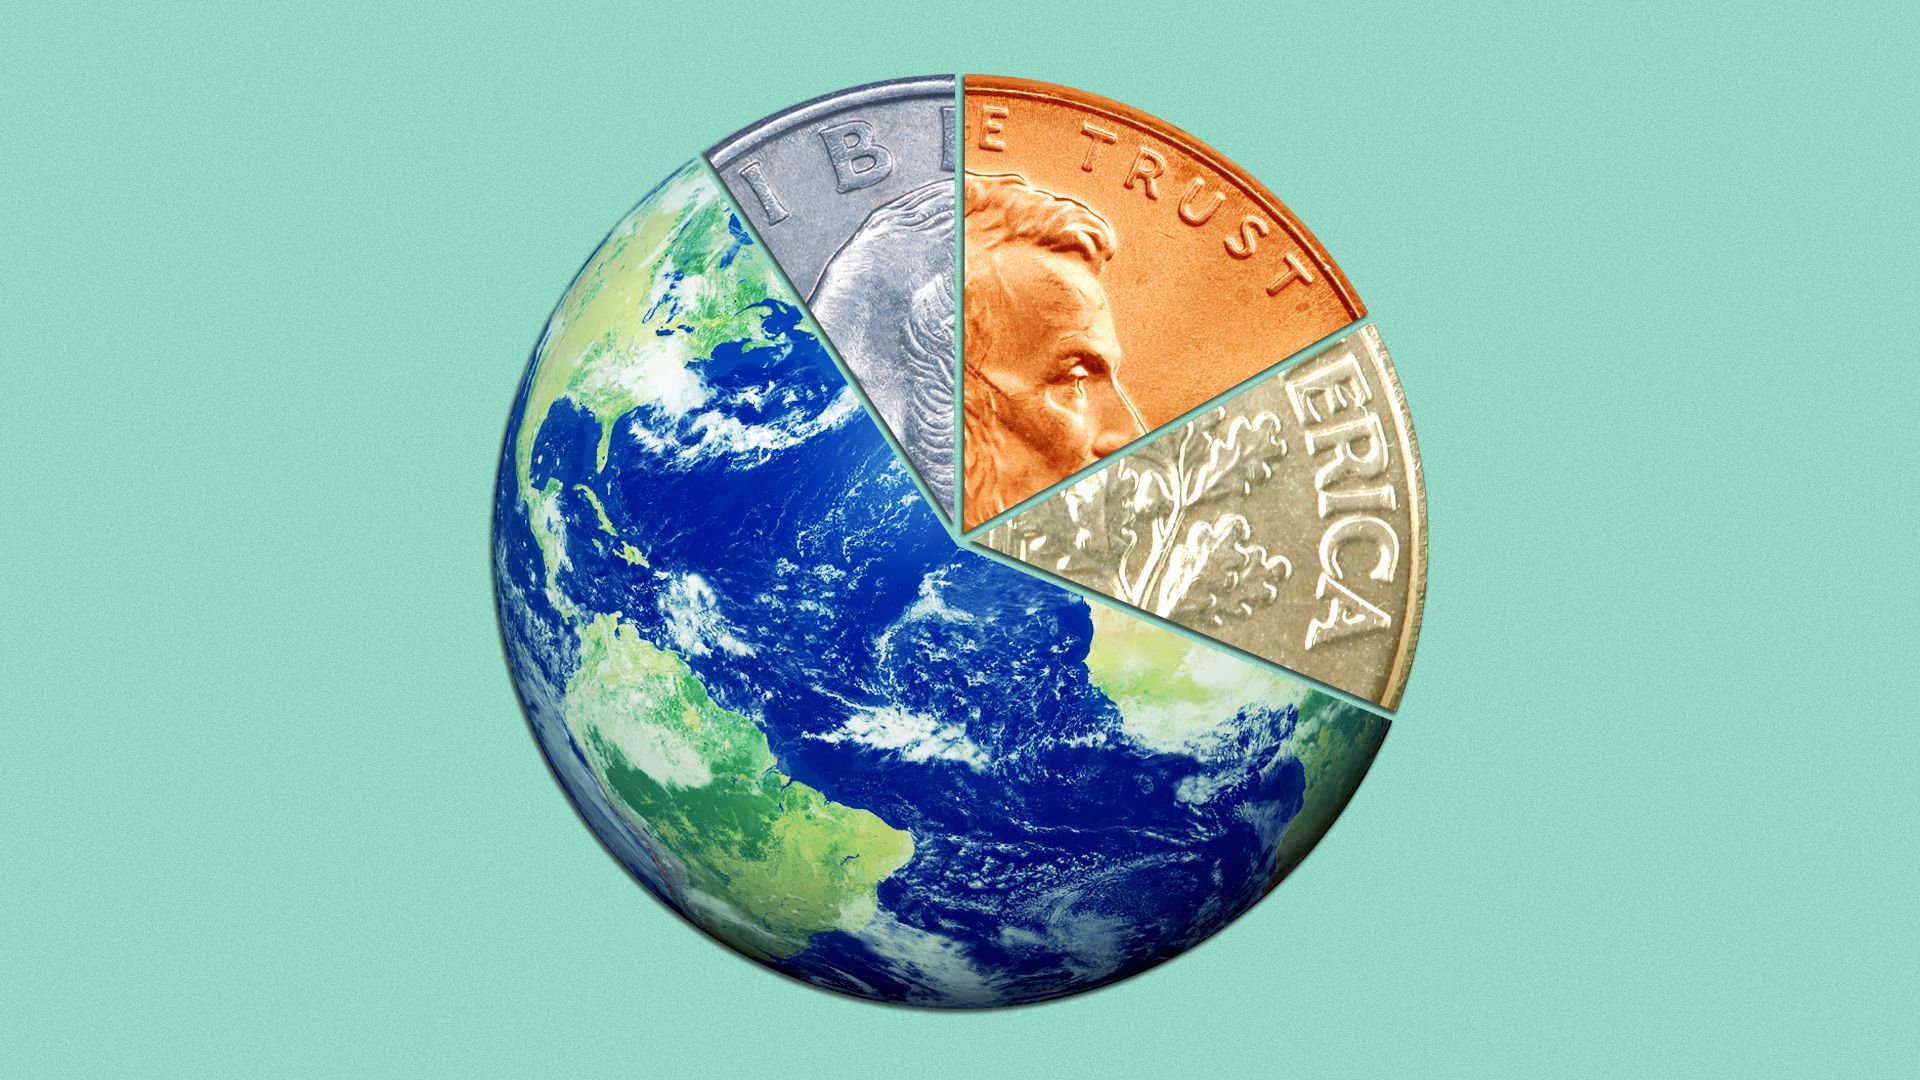 Illustration of the earth as a pie chart made up of various coins